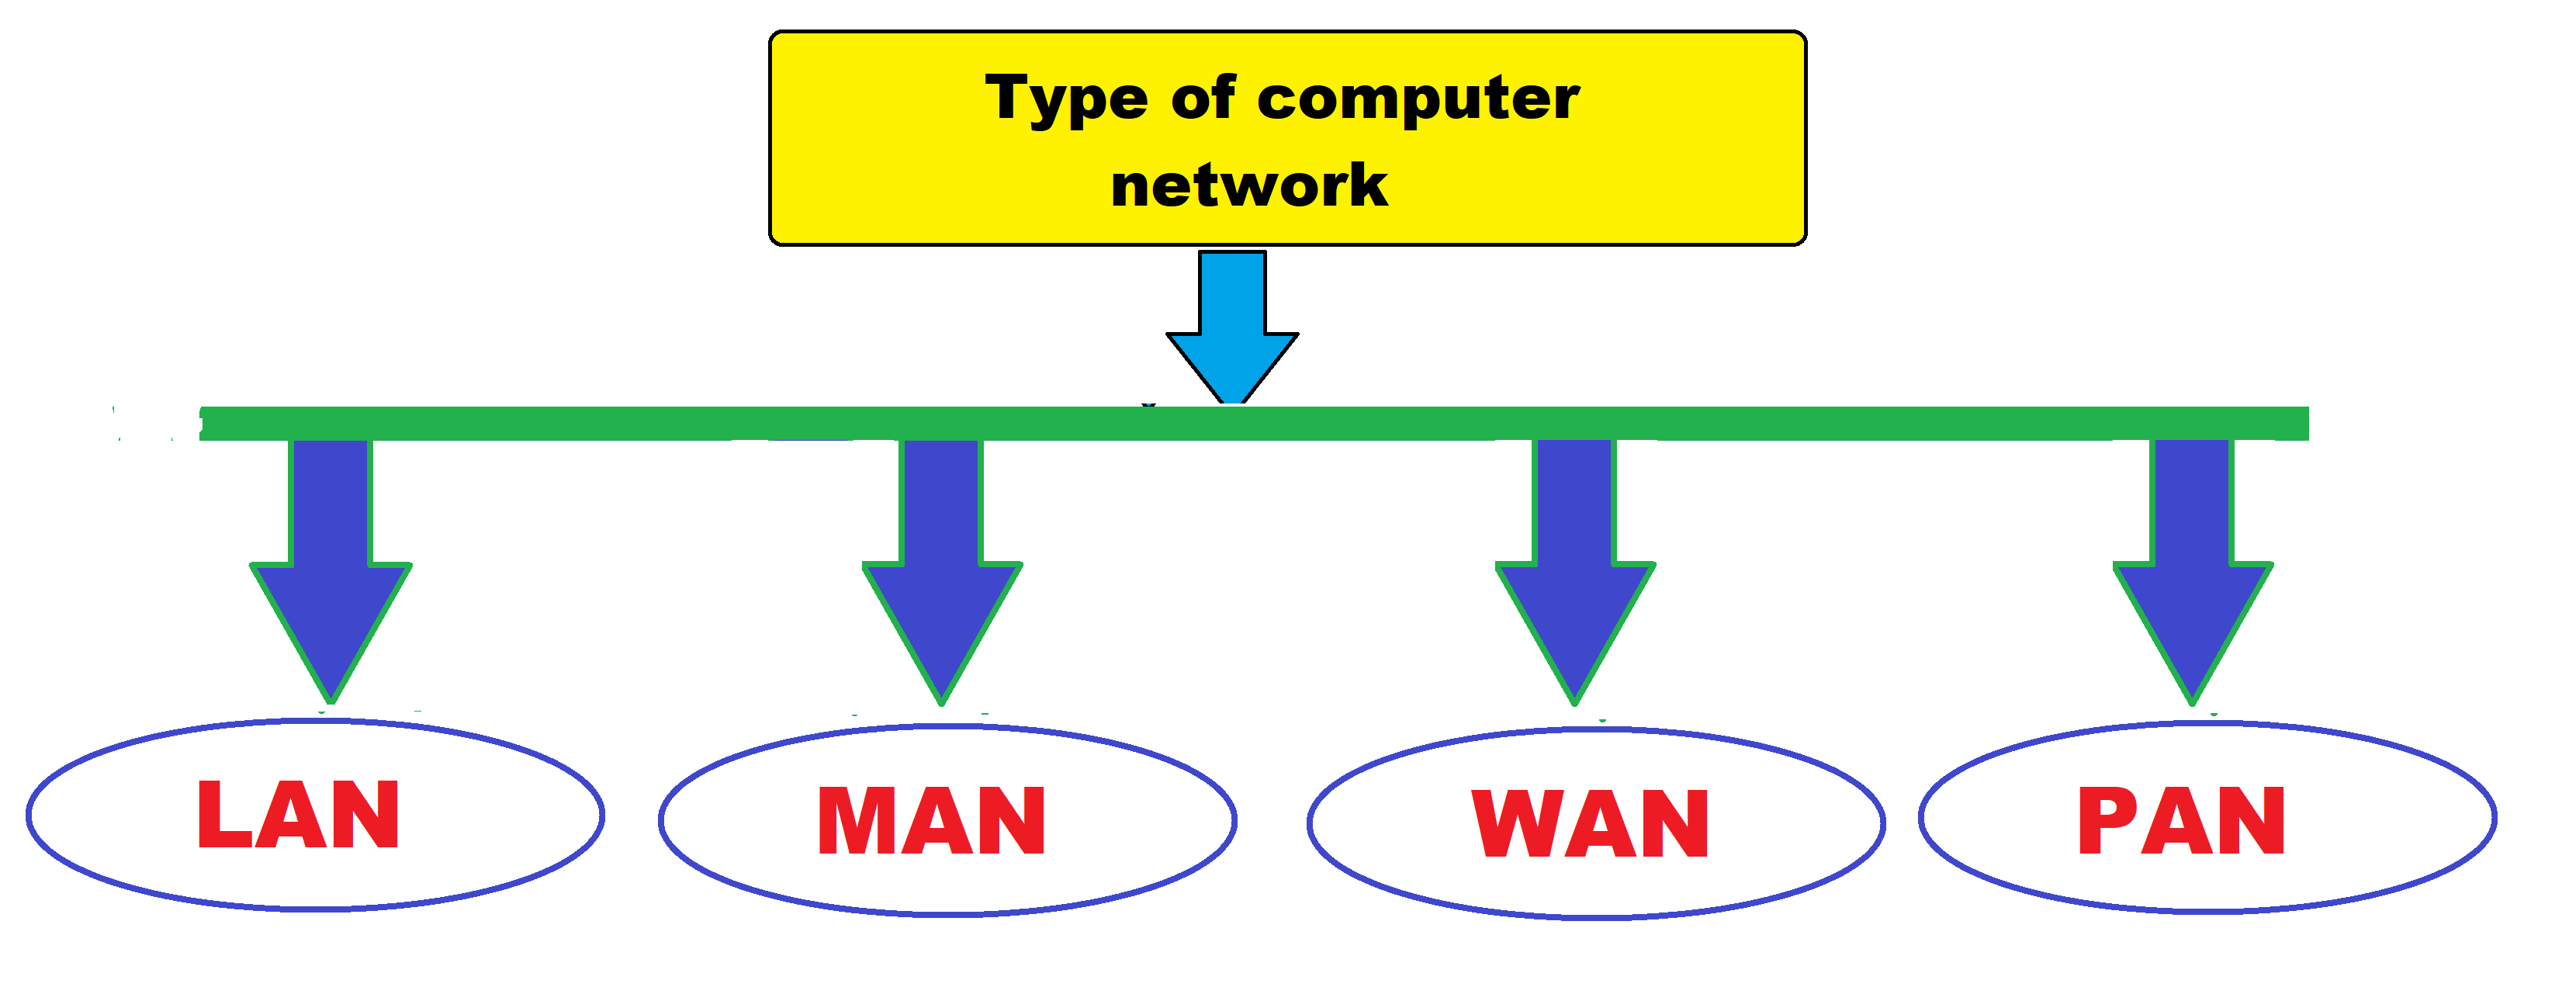 Type of computer network